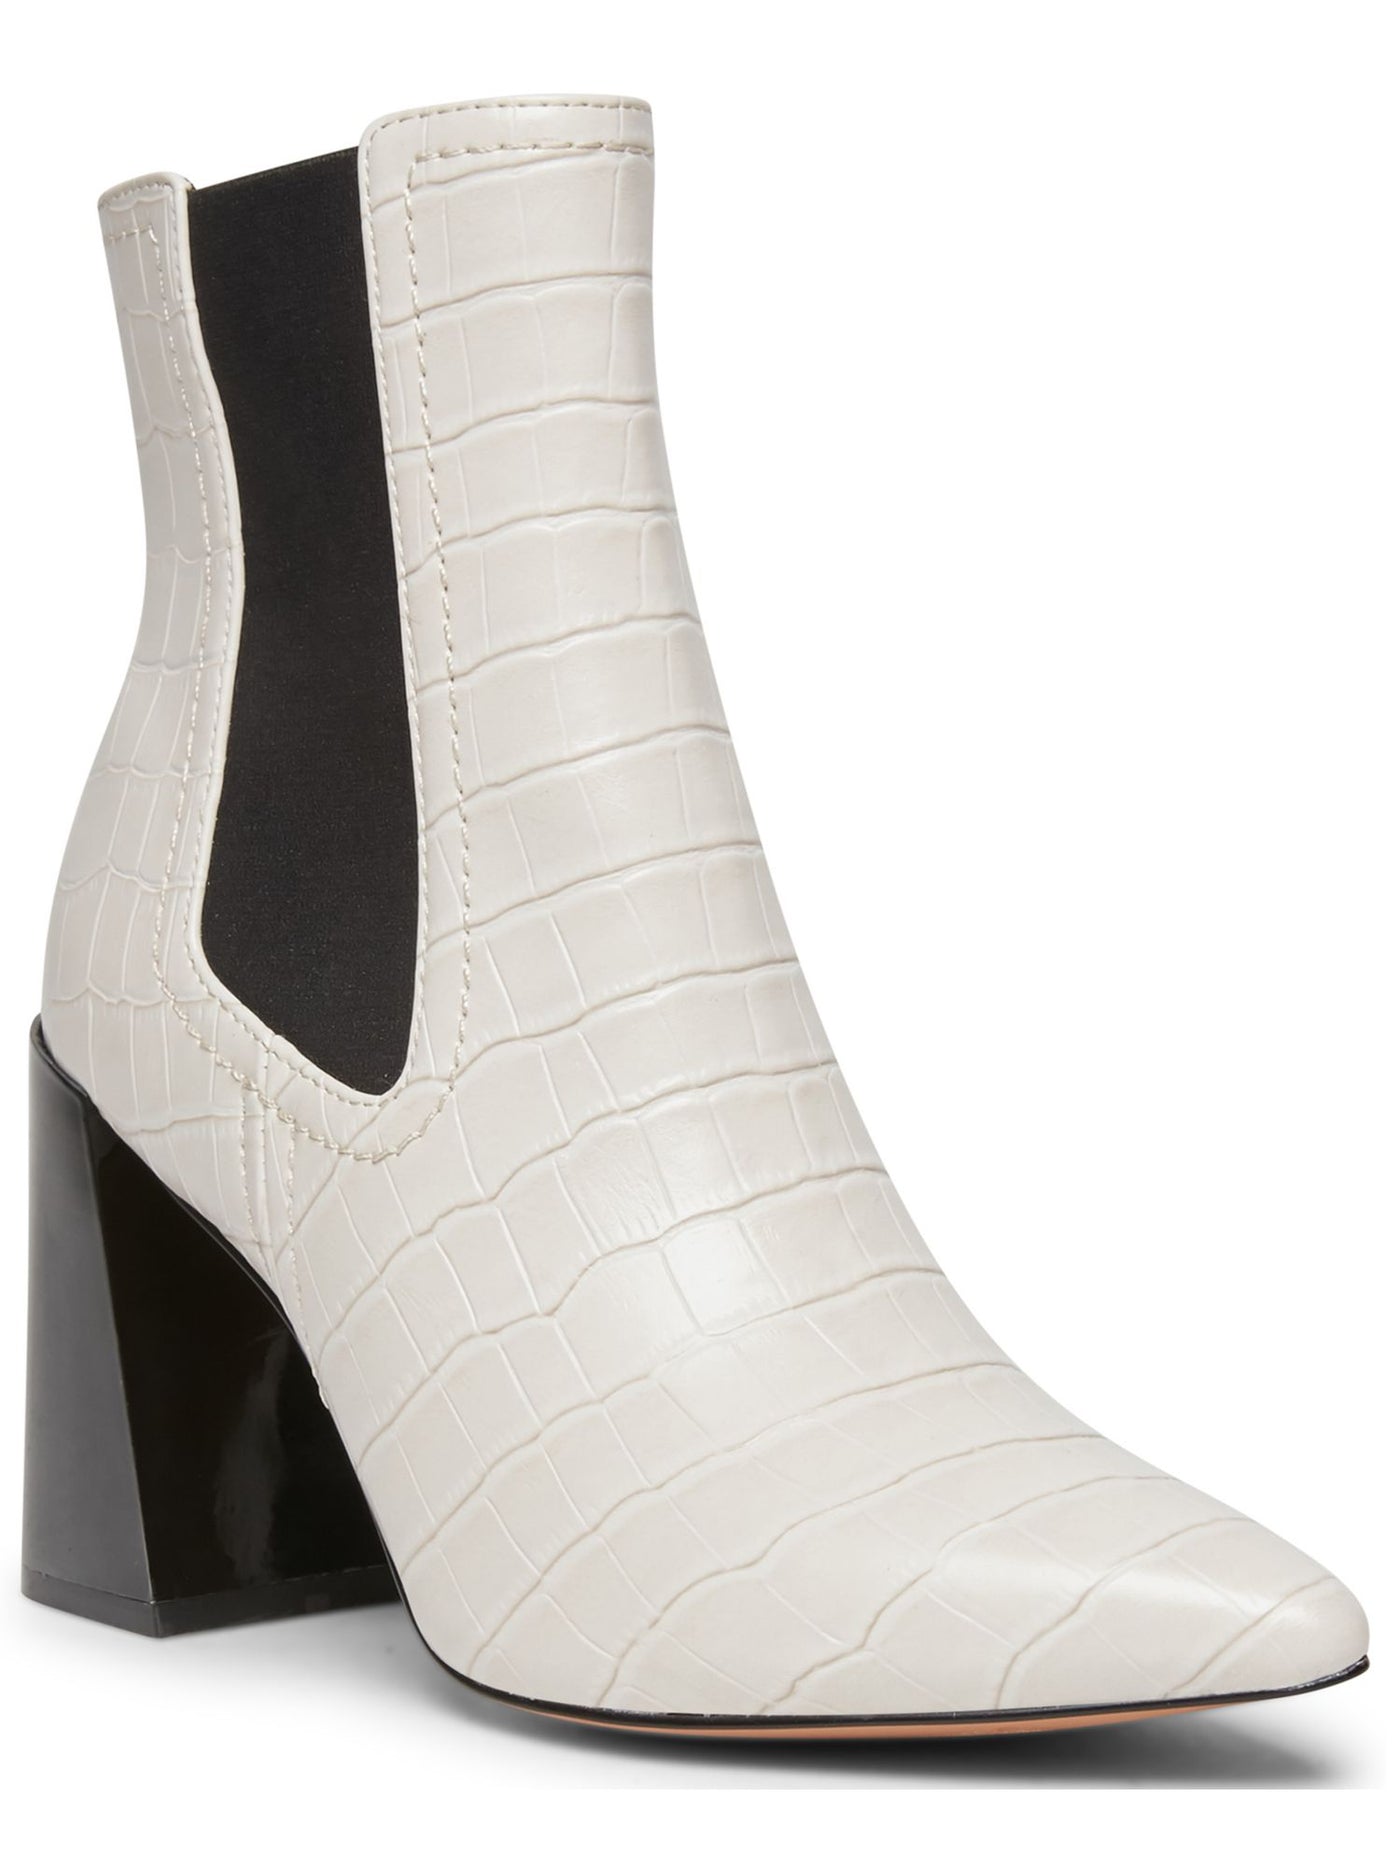 STEVEN Womens White Croc-Embossed Design Side Gores Cushioned Nico Pointed Toe Flare Dress Booties 10